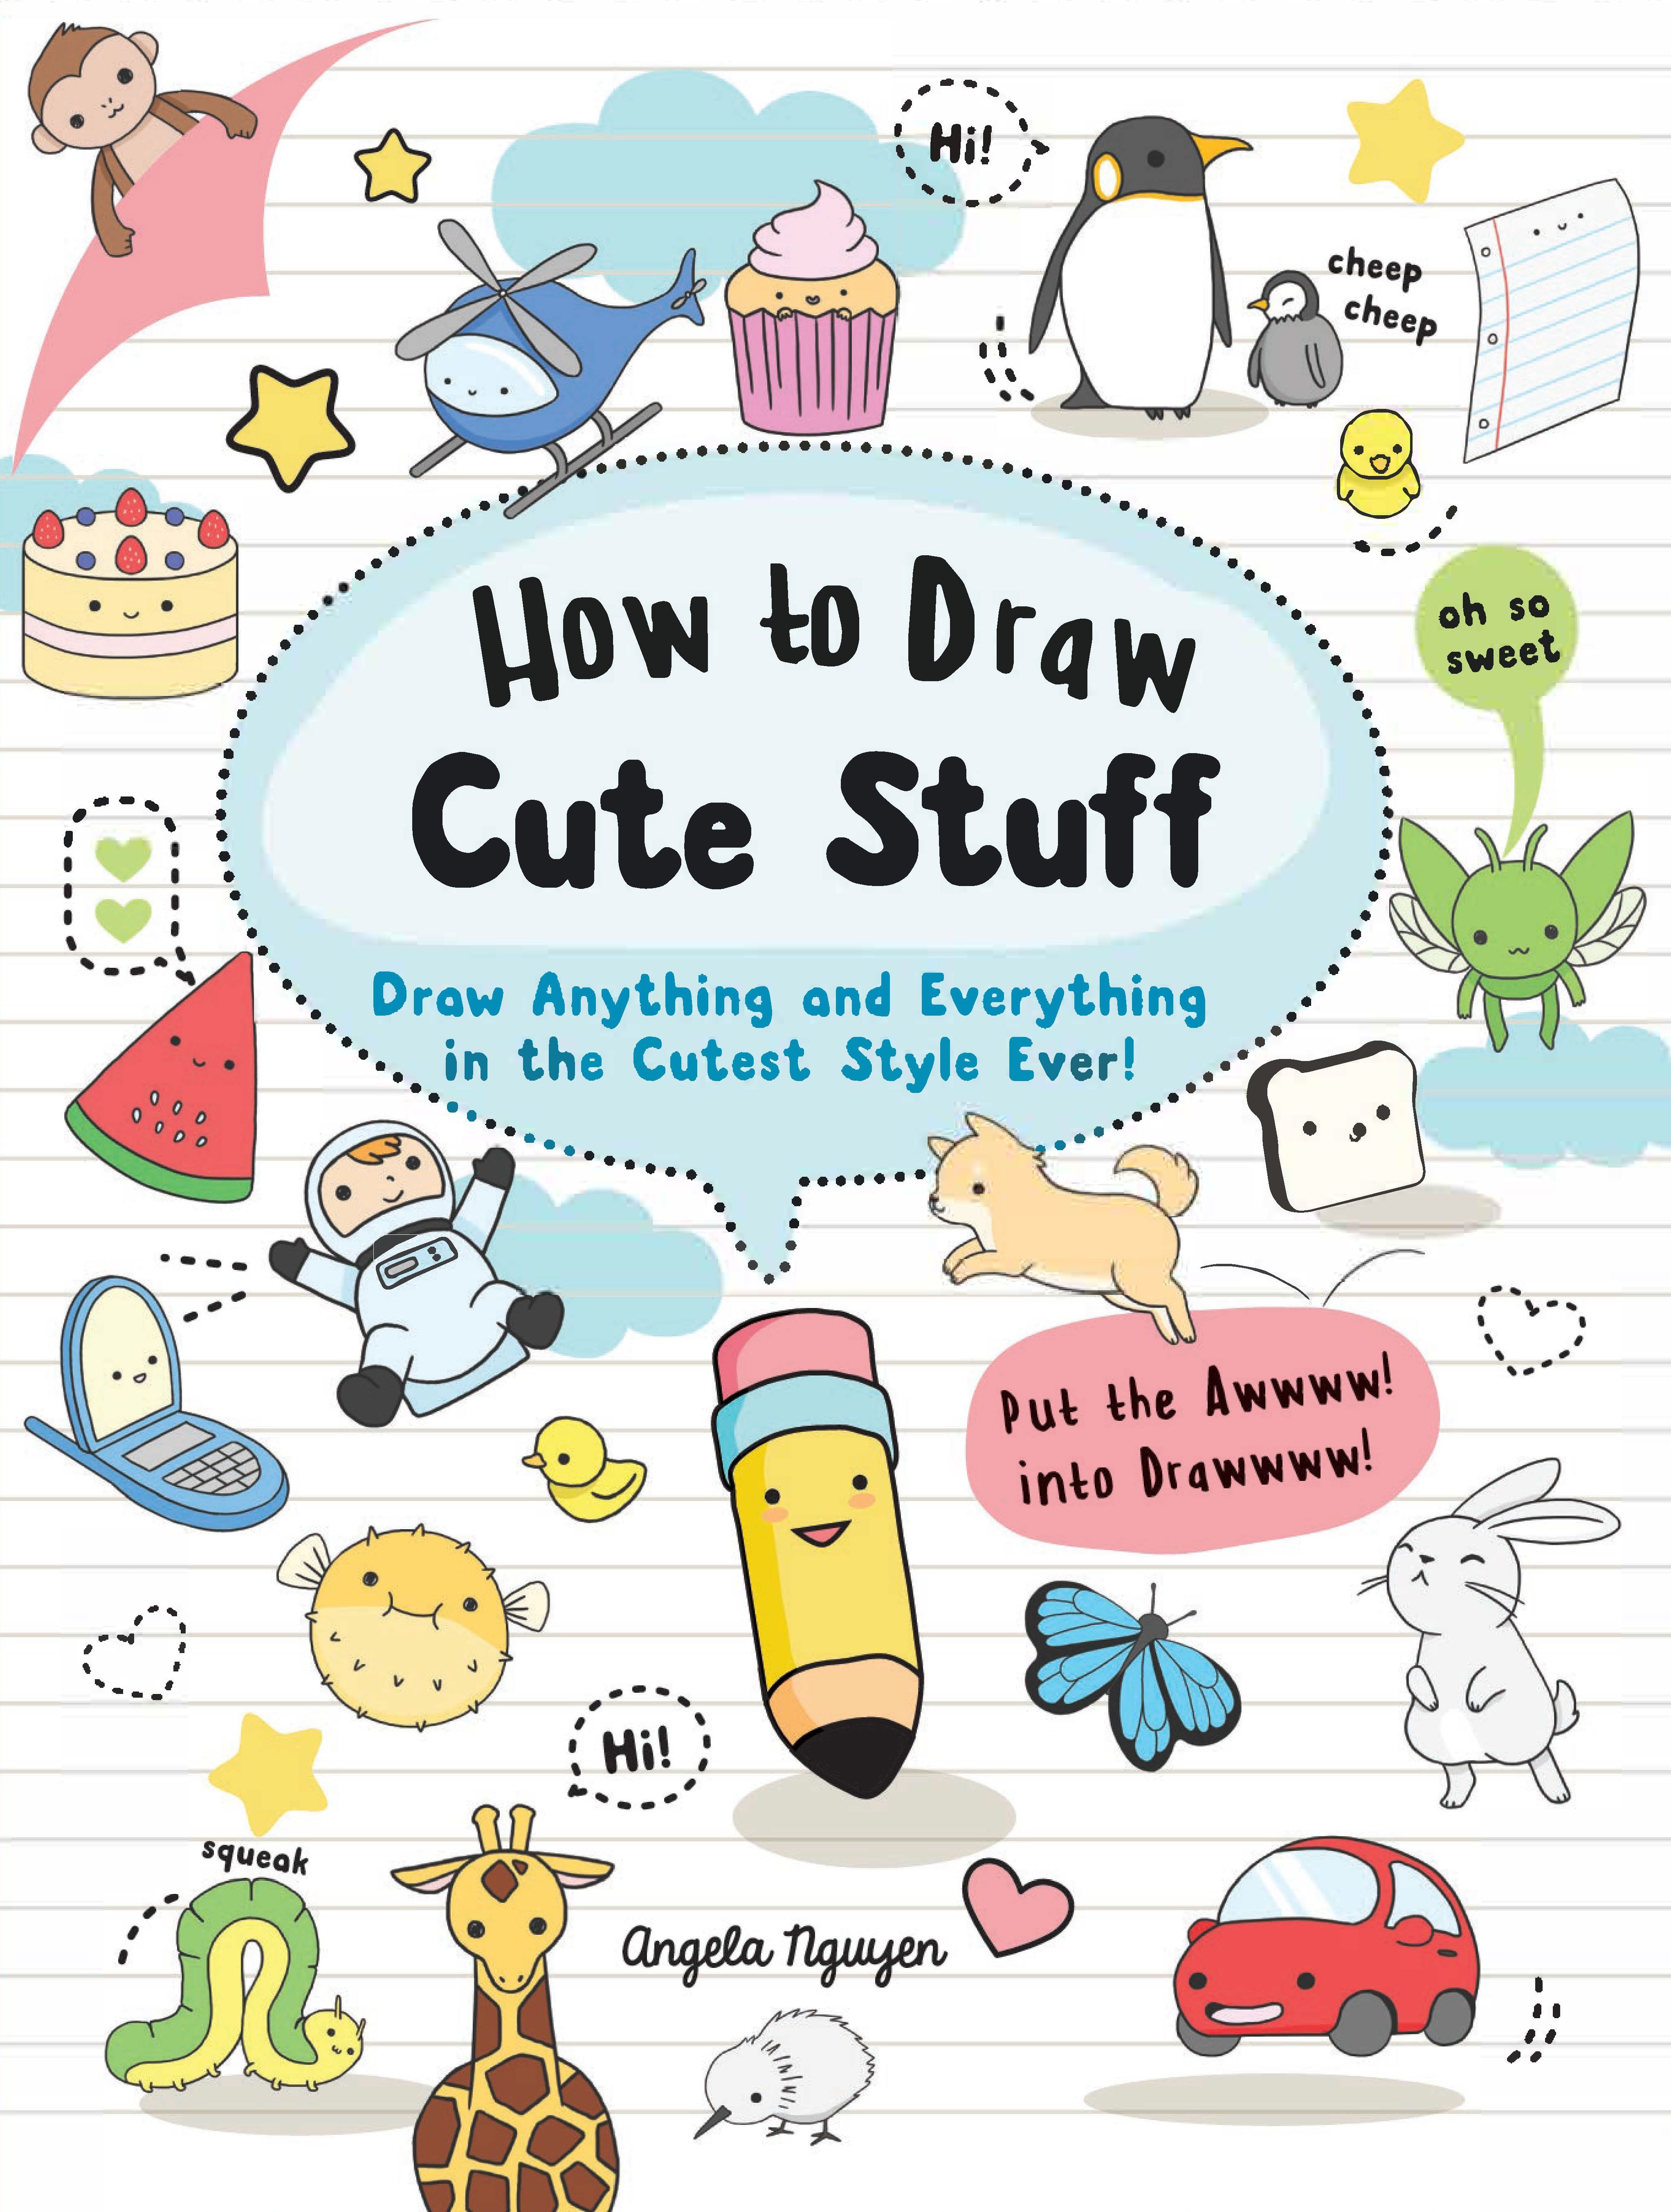 How to Draw Cute Stuff by Angela Nguyen